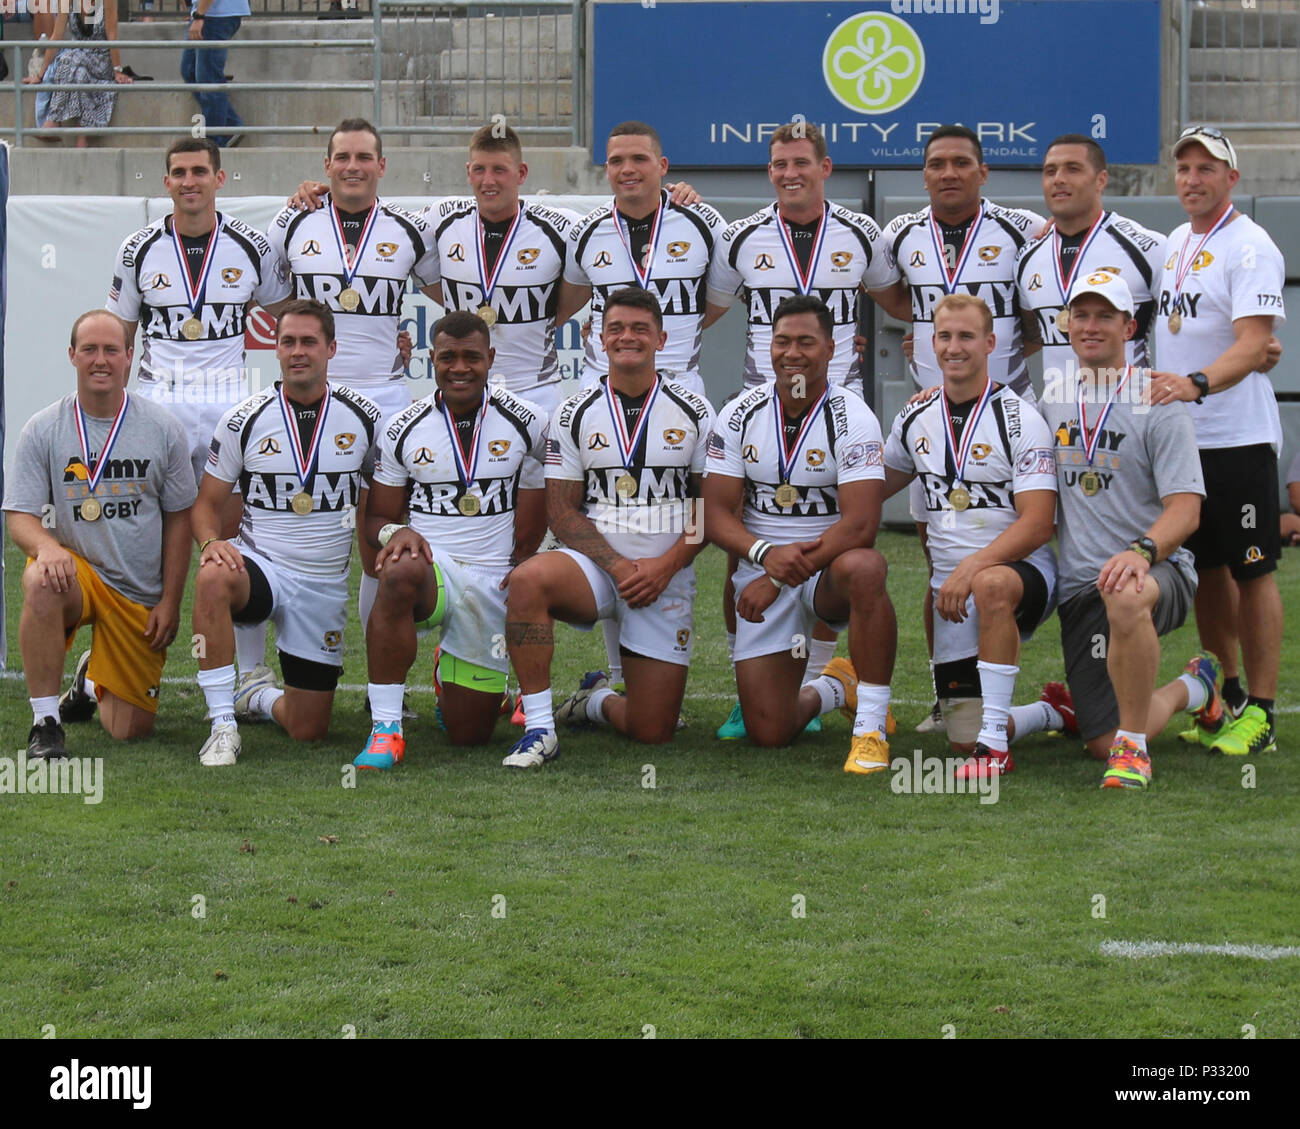 Soldier athletes of the All-Army rugby team pose for a group photo after dominating the U.S. Air Force, 55-5, in the 2016 U.S. Armed Forces Rugby Sevens Championship, Infinity Park, Glendale, Colo., Aug. 27. This year is the fourth consecutive win for the All-Army team. Stock Photo